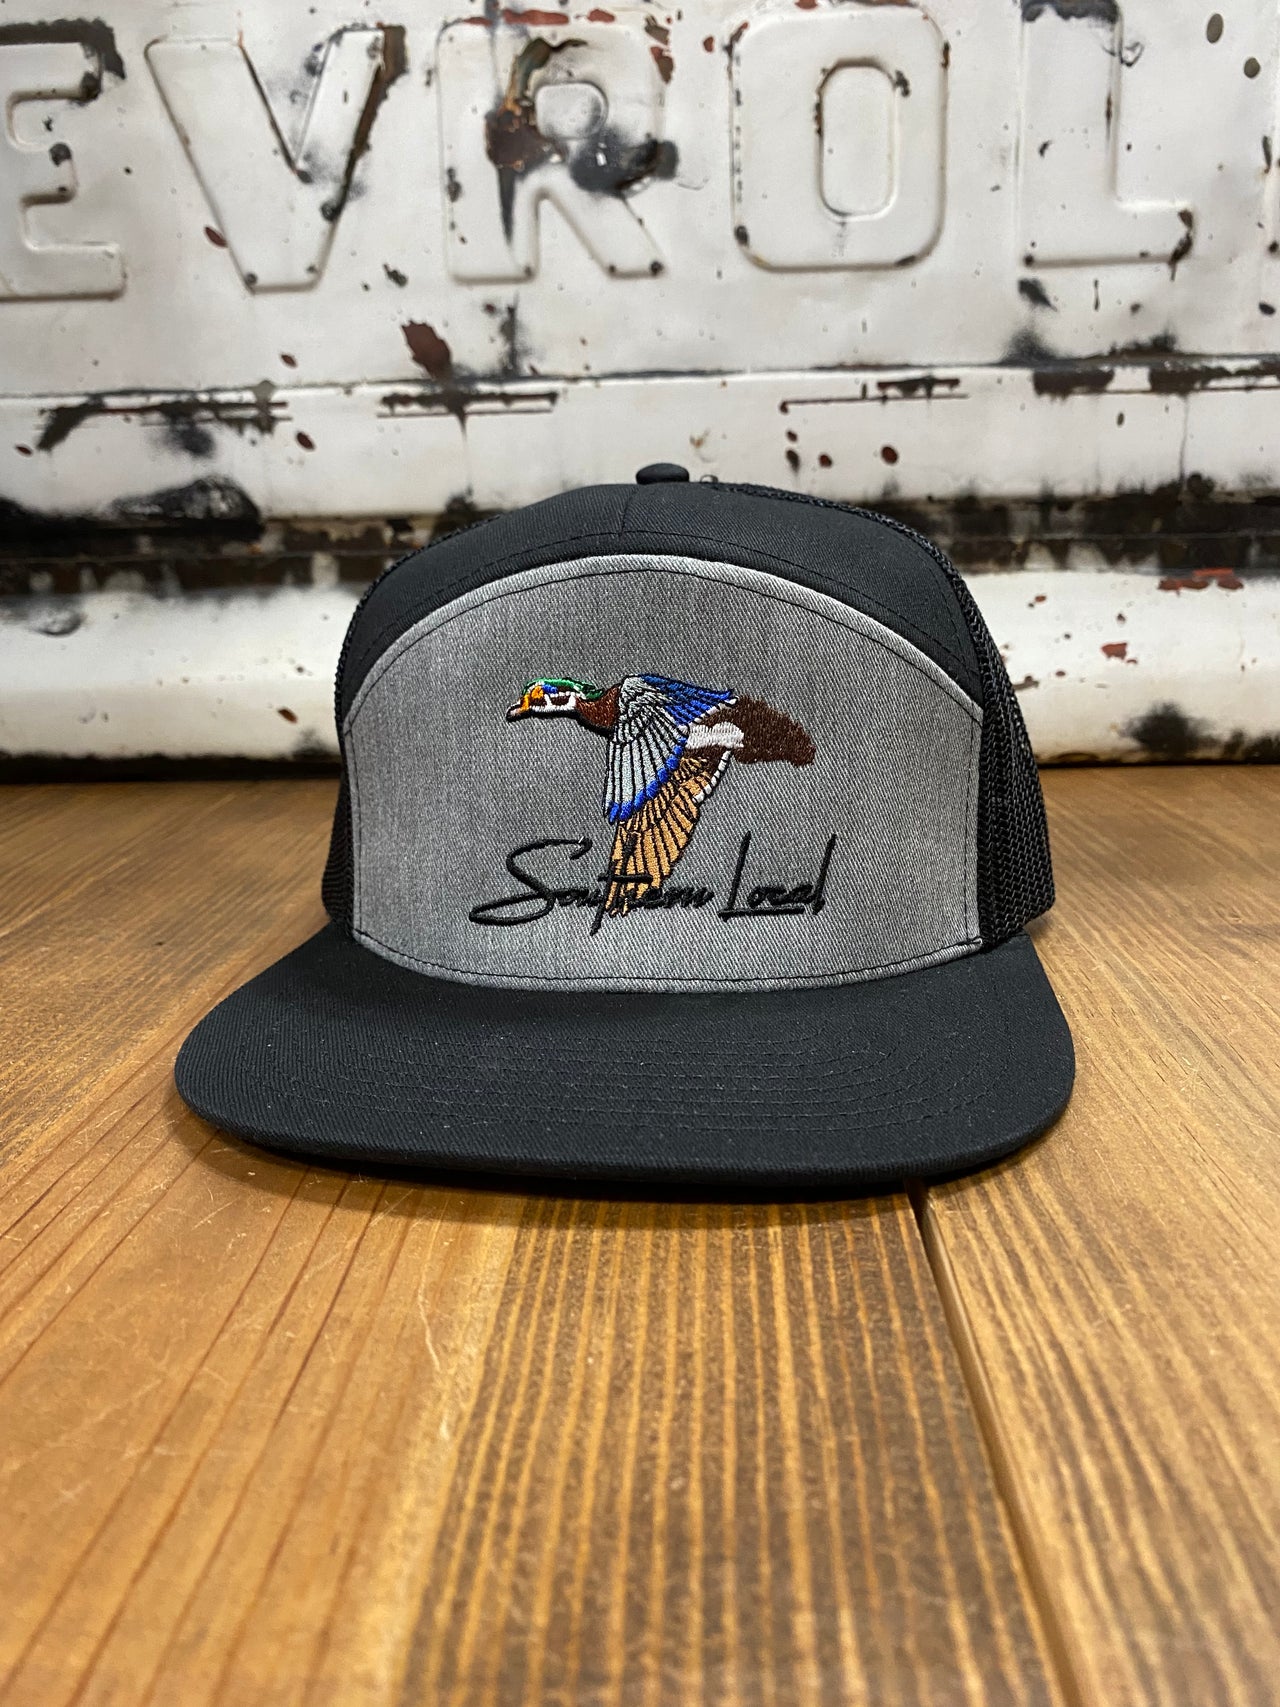 Heather Grey/Black Southern Local Wood Duck 7 Panel Cap - A blend of classic style and Southern charm. Distinctive wood duck embroidery adds character to this meticulously crafted cap. Comfortable seven-panel construction, premium materials, and versatile design for city or outdoor adventures.